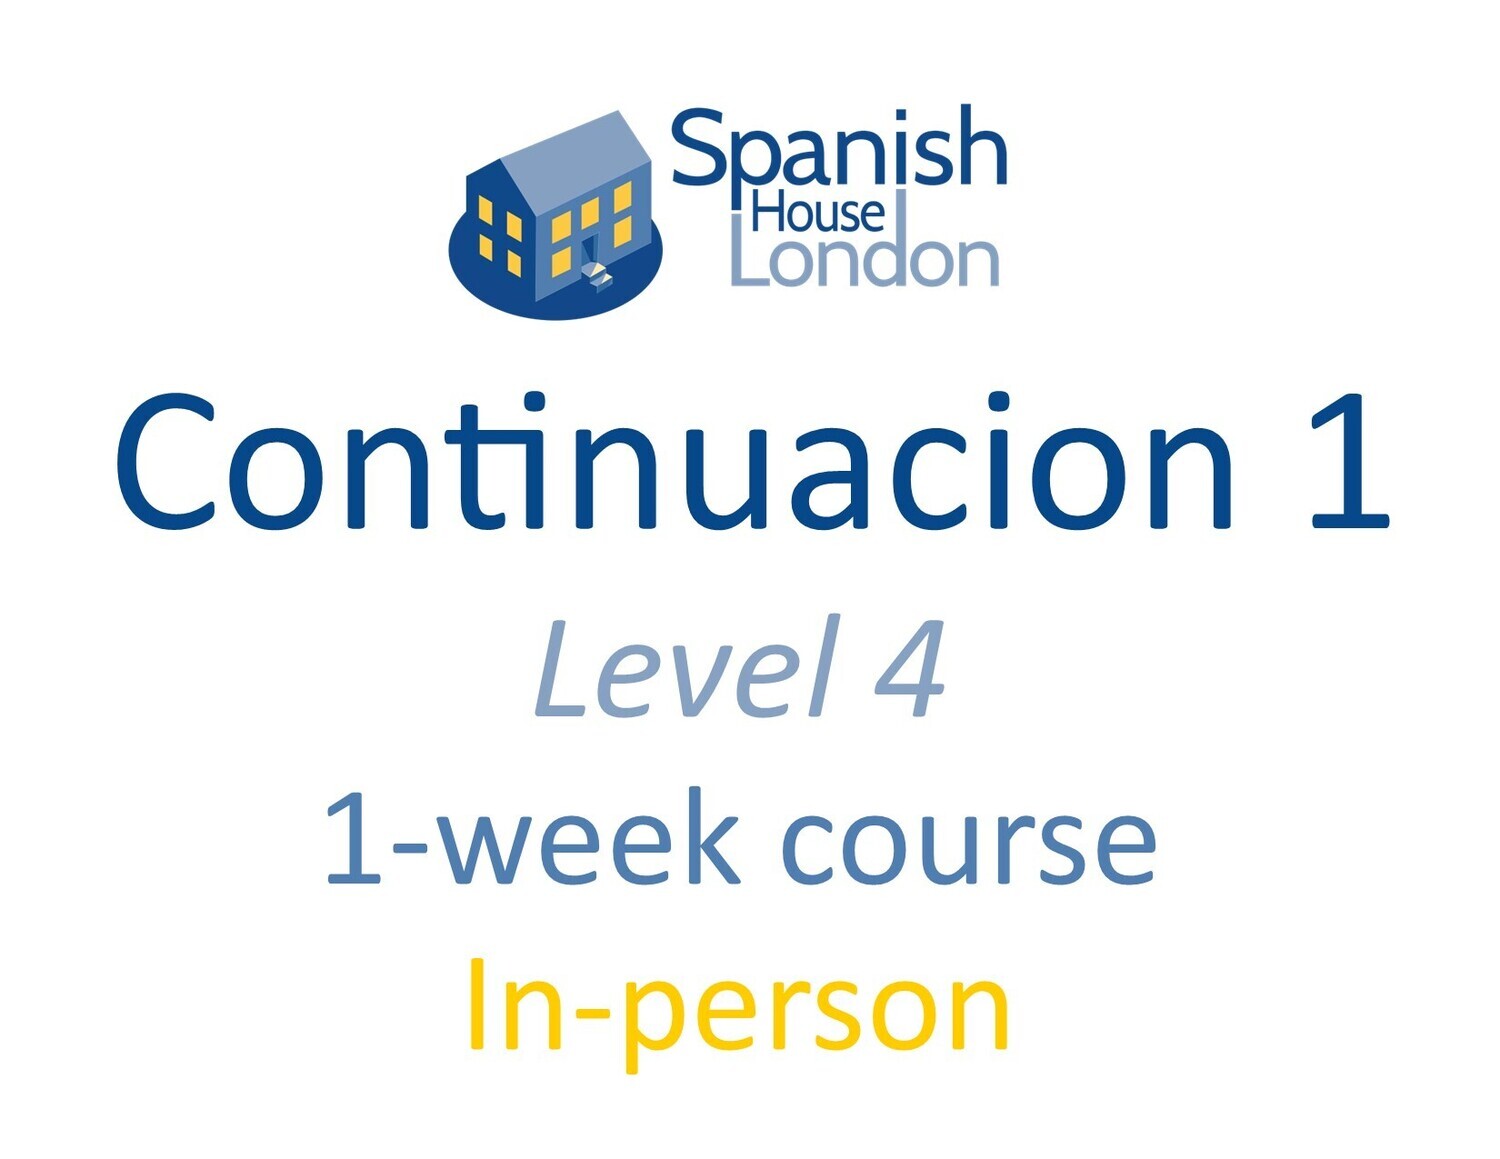 One-Week Intensive Continuacion 1 Course starting on 22nd May at 10.30am in Clapham North